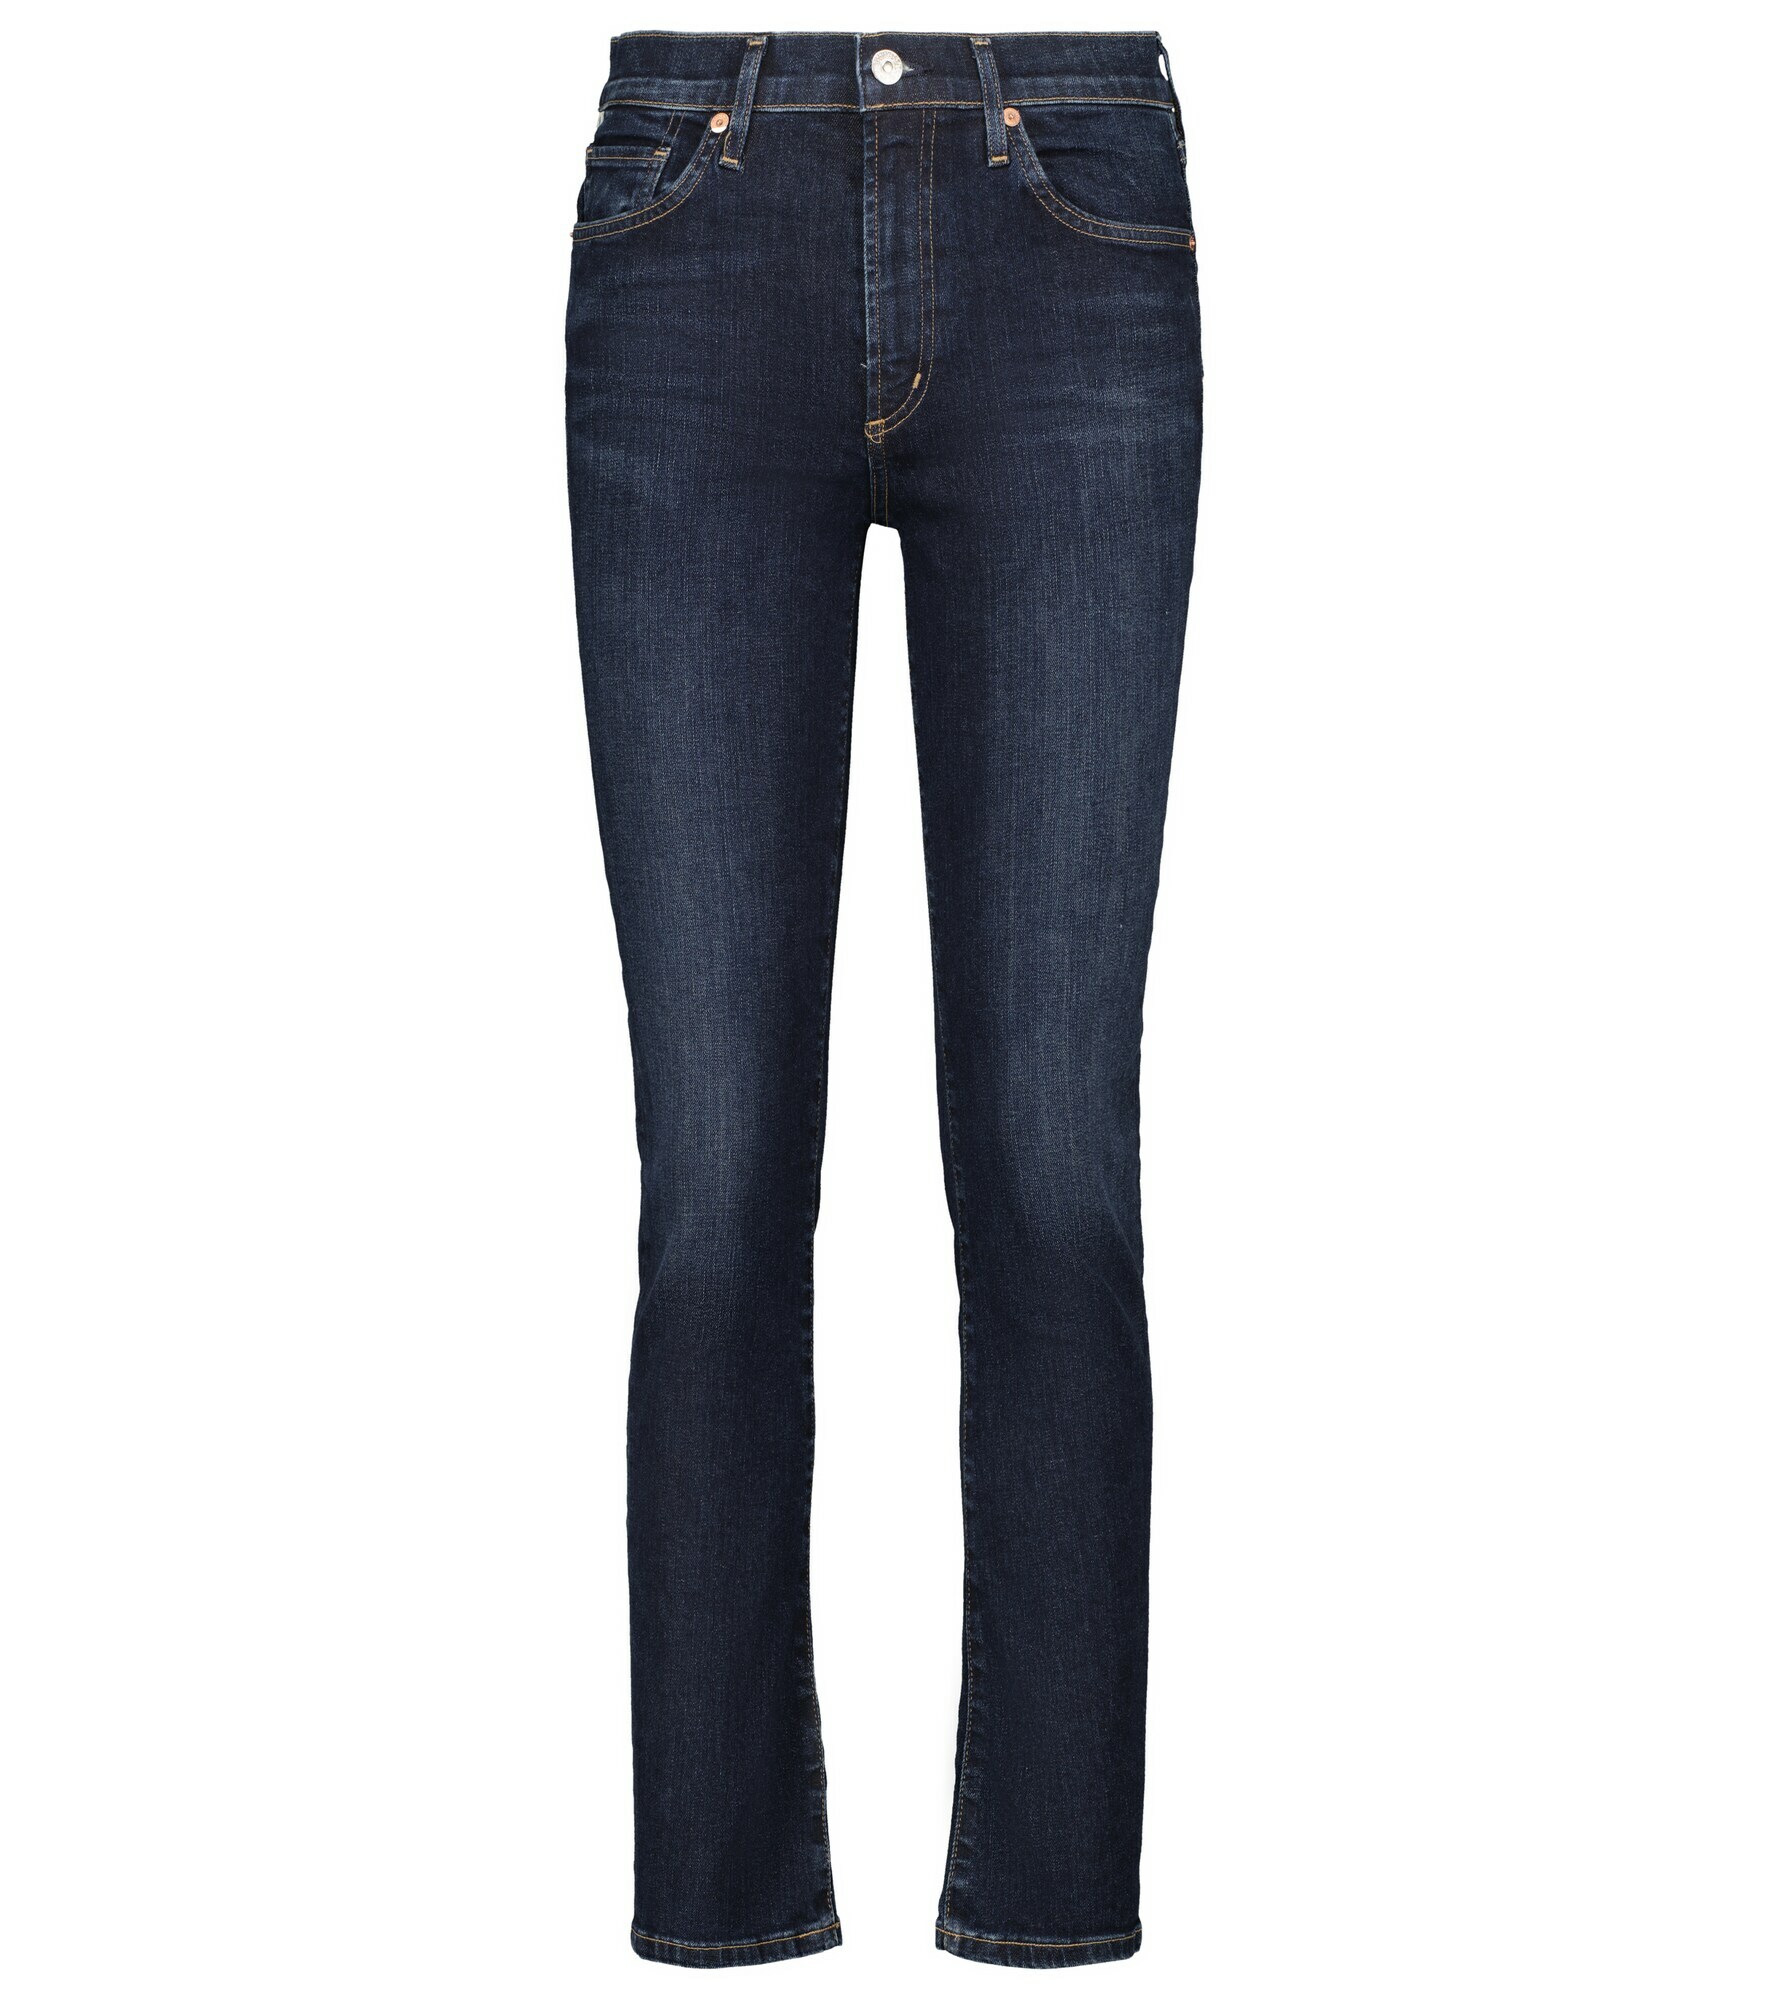 Citizens of Humanity - Skylar mid-rise slim jeans Citizens of Humanity